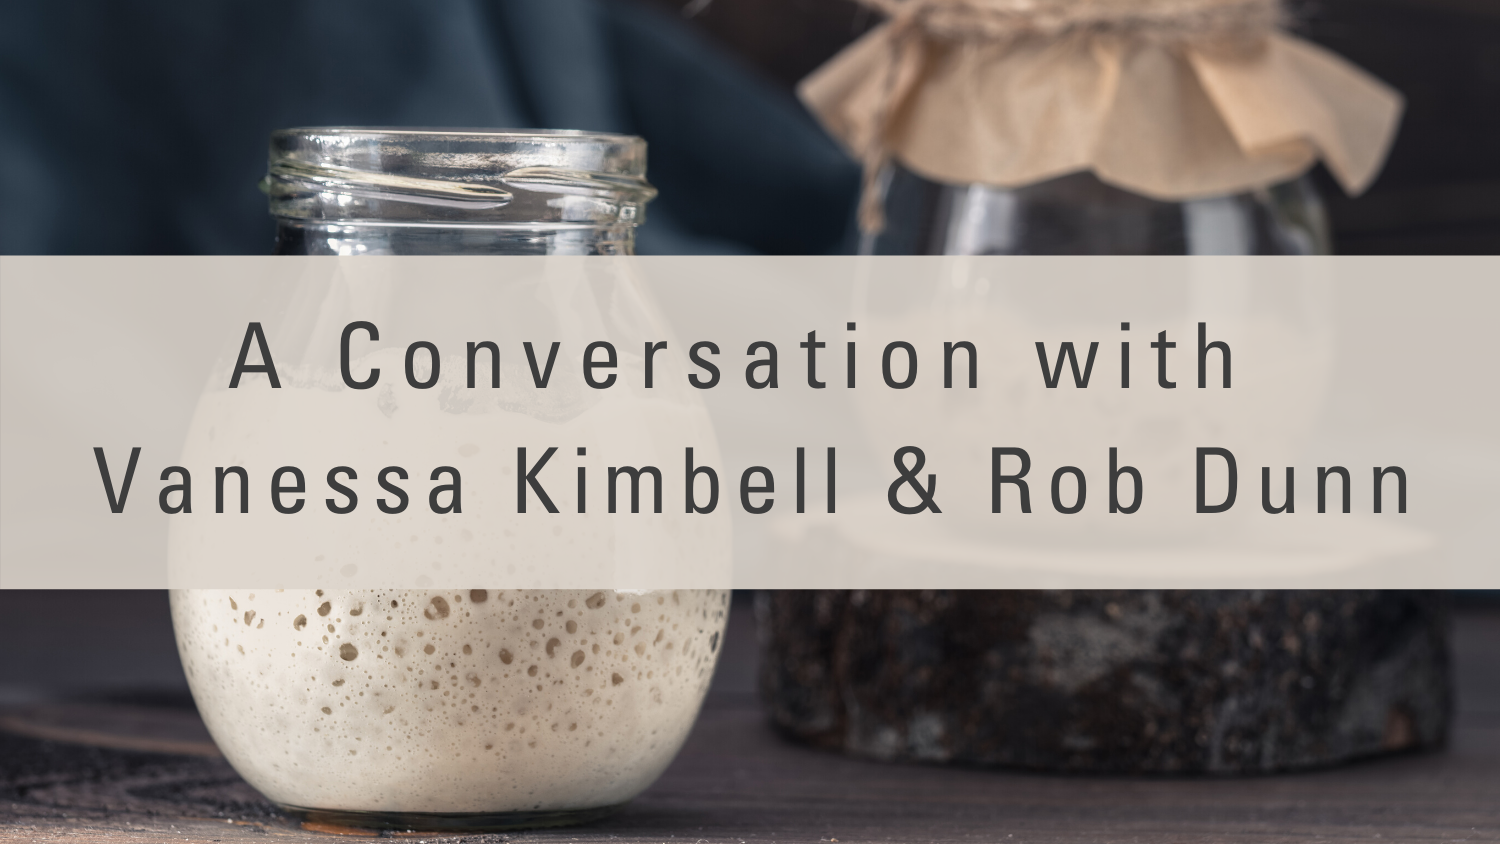 A Conversation with Vanessa Kimbell and Rob Dunn